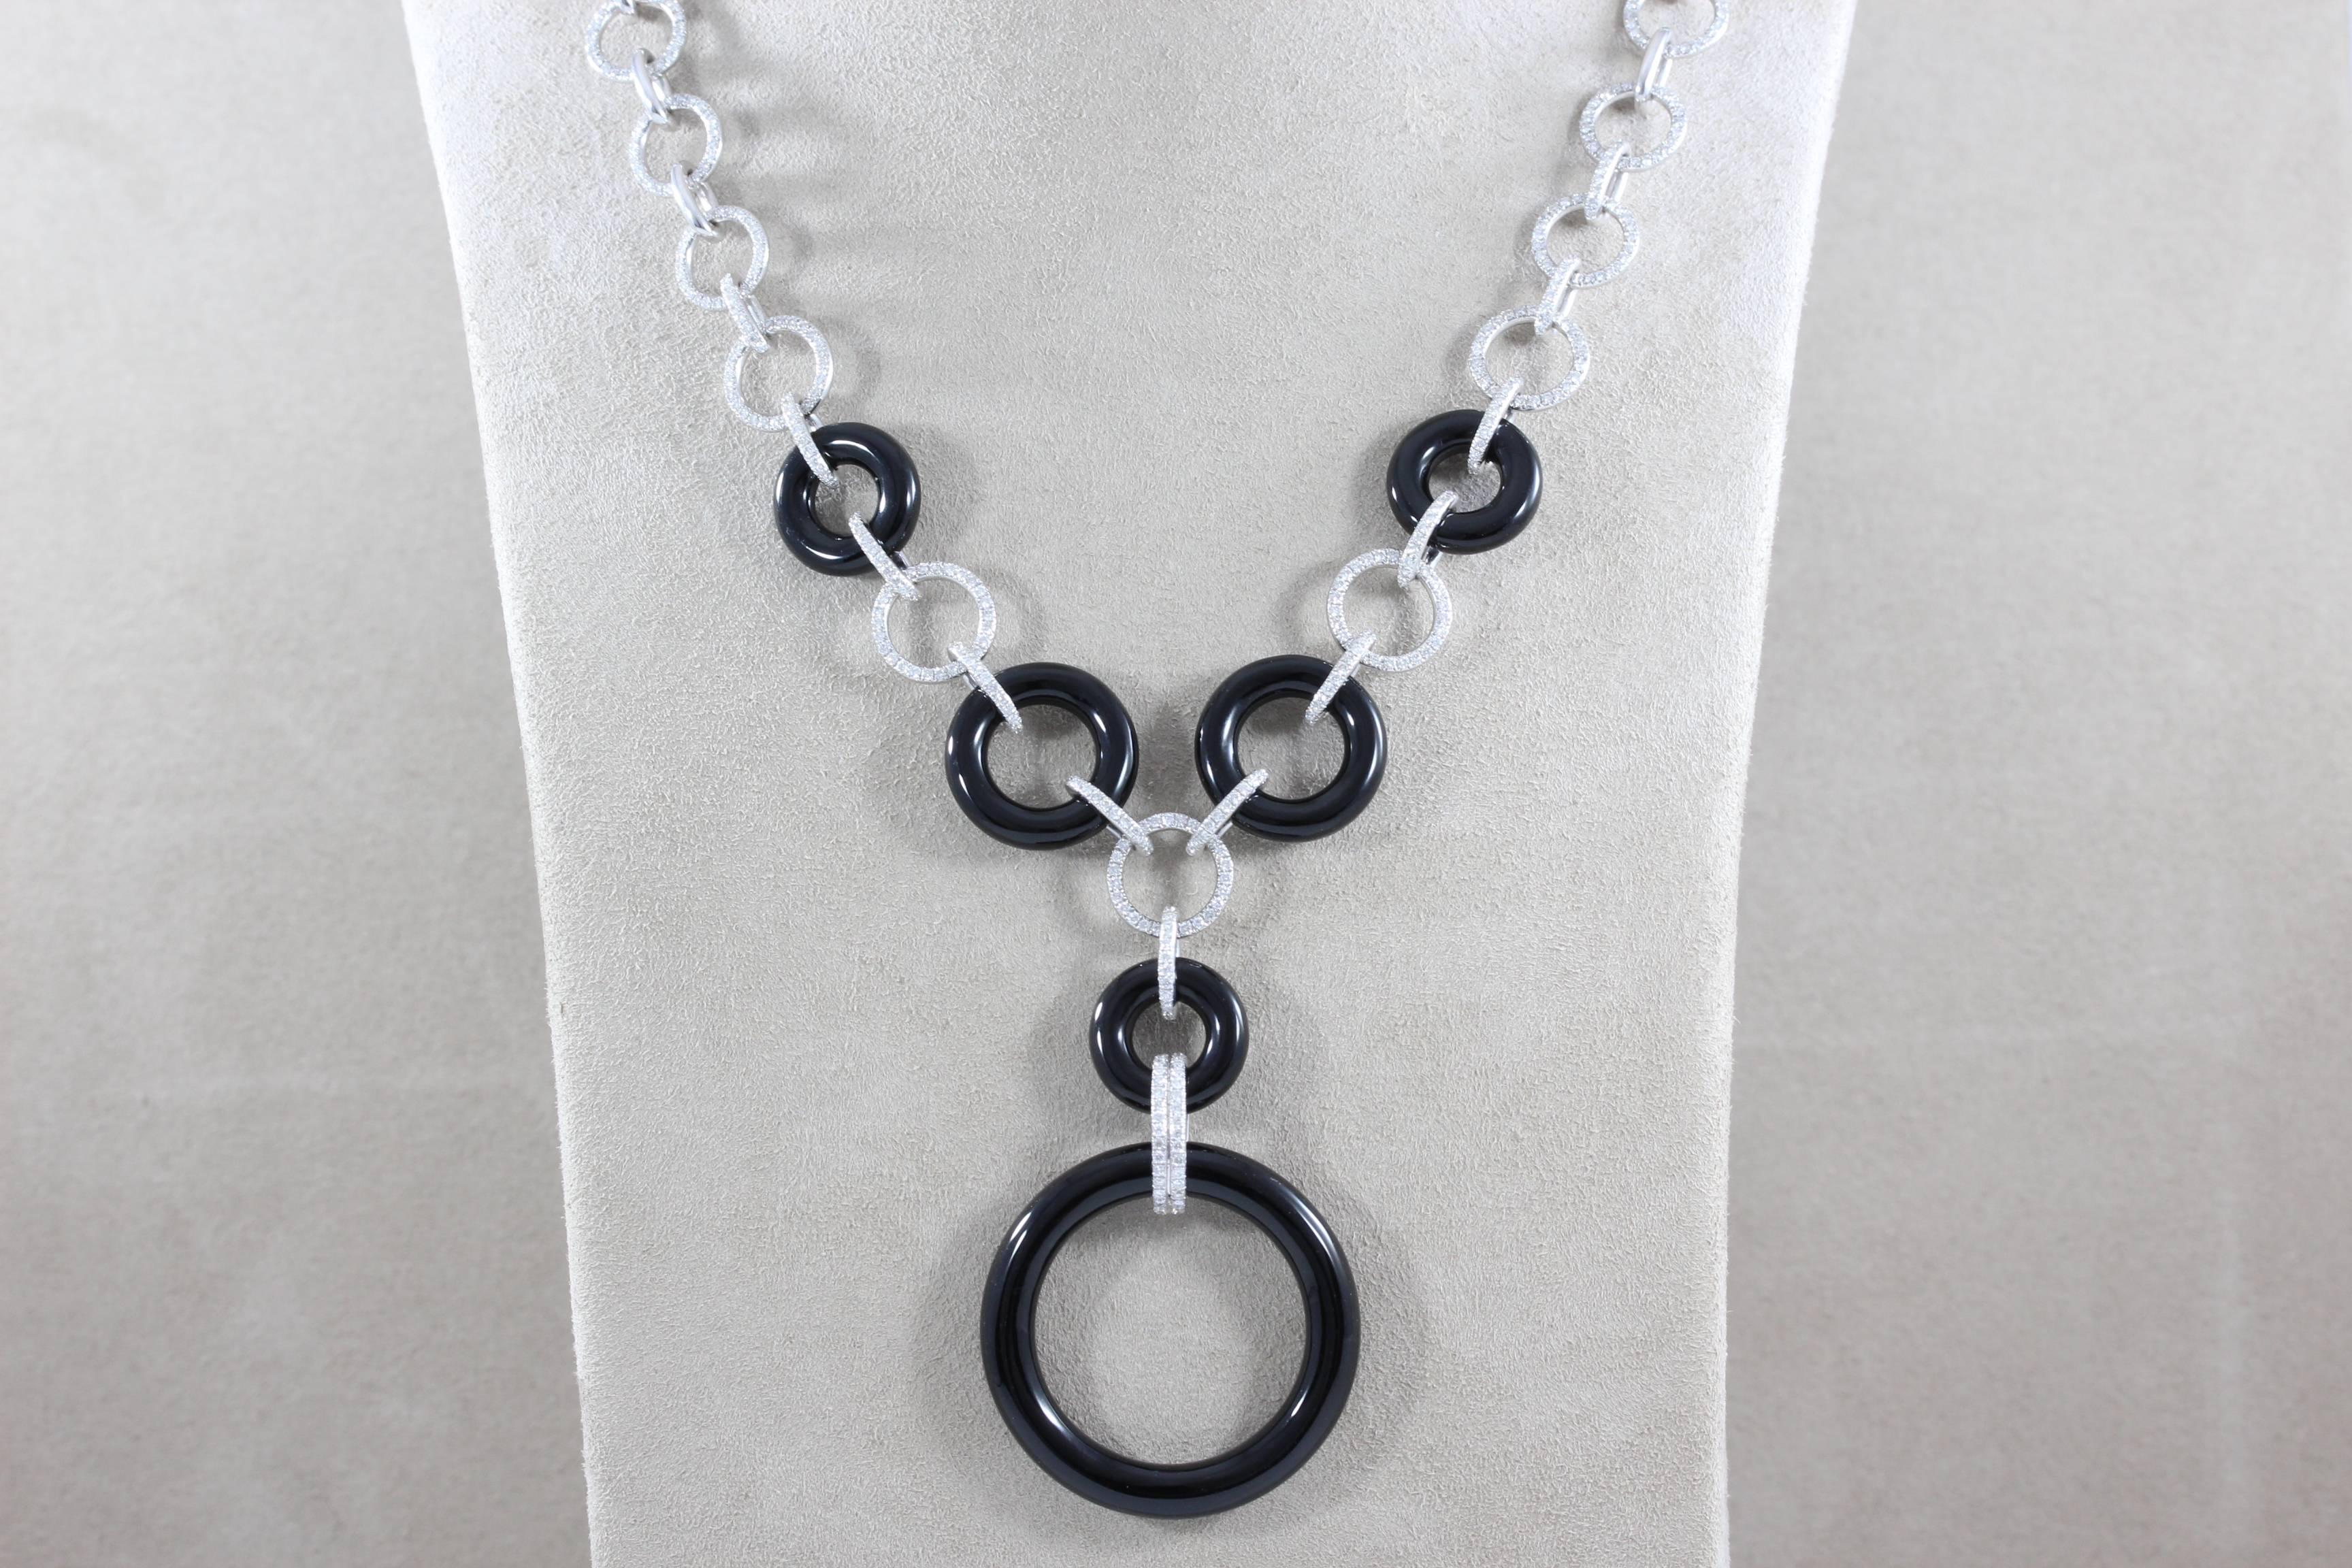 A unique necklace featuring over 3 carats of VS quality round cut diamonds set in 18K white gold. Fine jet black onyx carved into perfect circles are linked together with the gold diamond studded links. A clean sophisticated look.  

Length: 11